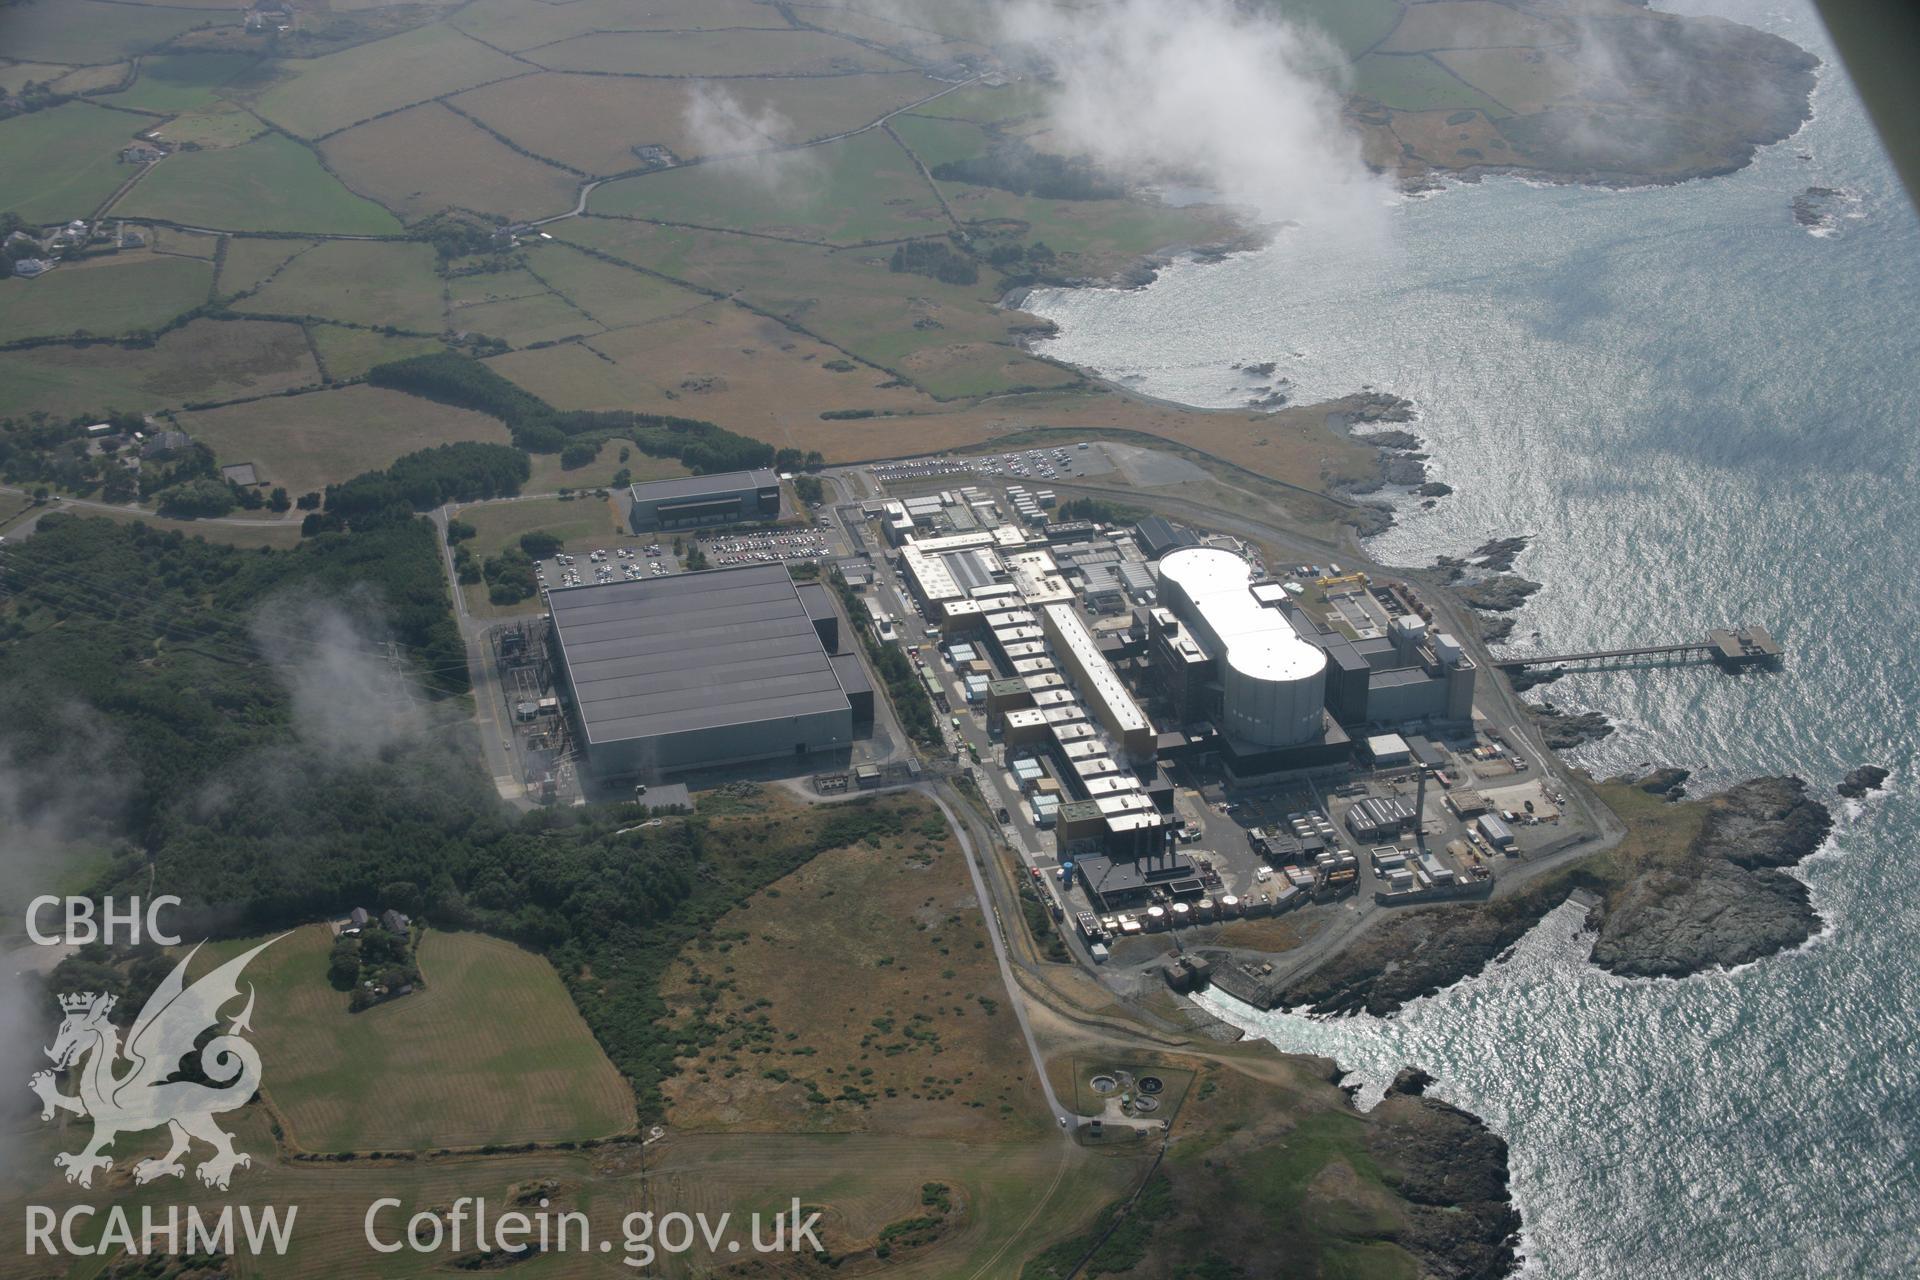 RCAHMW colour oblique aerial photograph of Wylfa Nuclear Power Station. Taken on 14 August 2006 by Toby Driver.